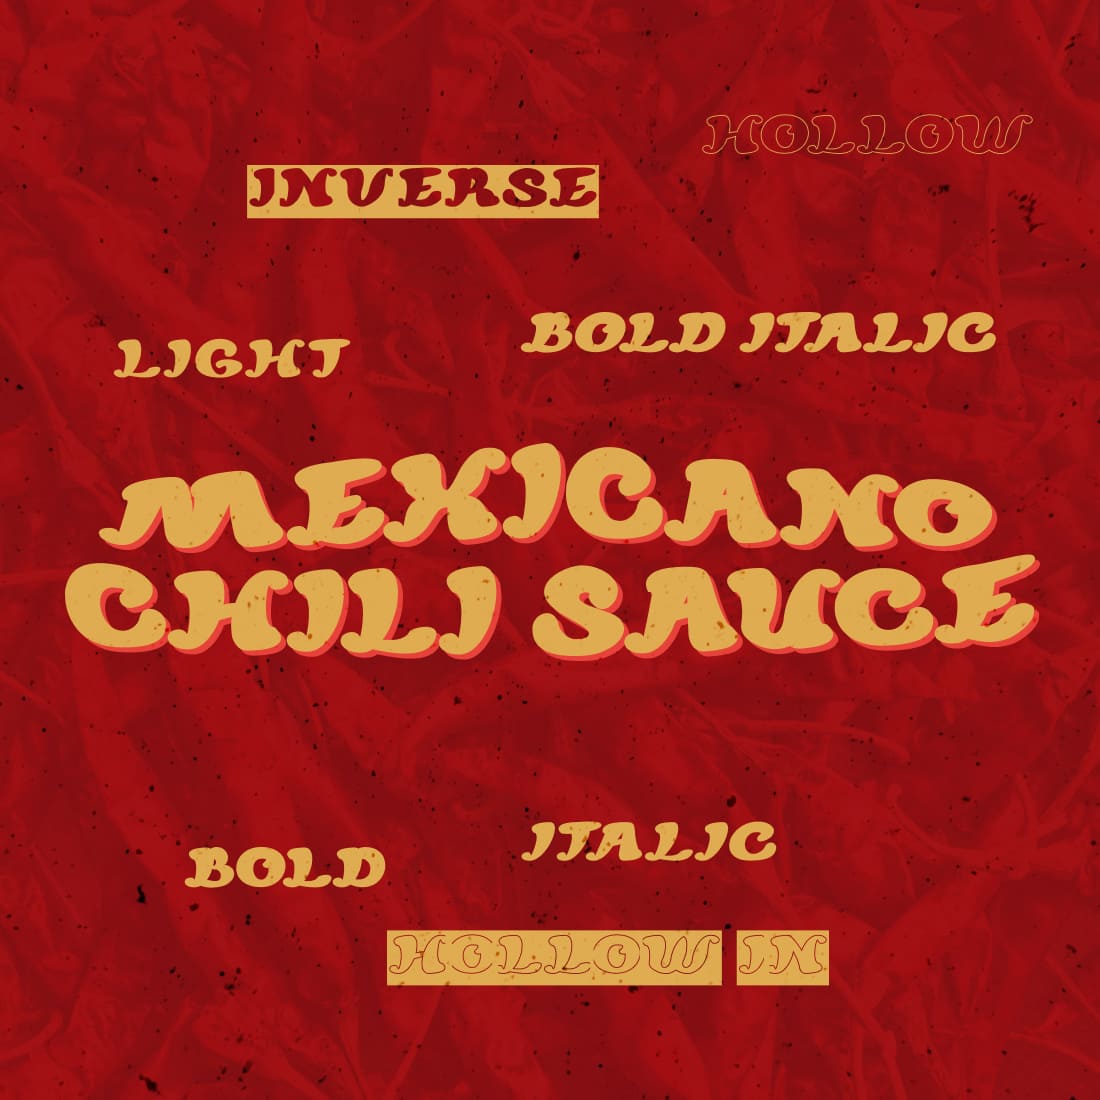 Free Mexican Font Mexicano Chili Sauce main cover.